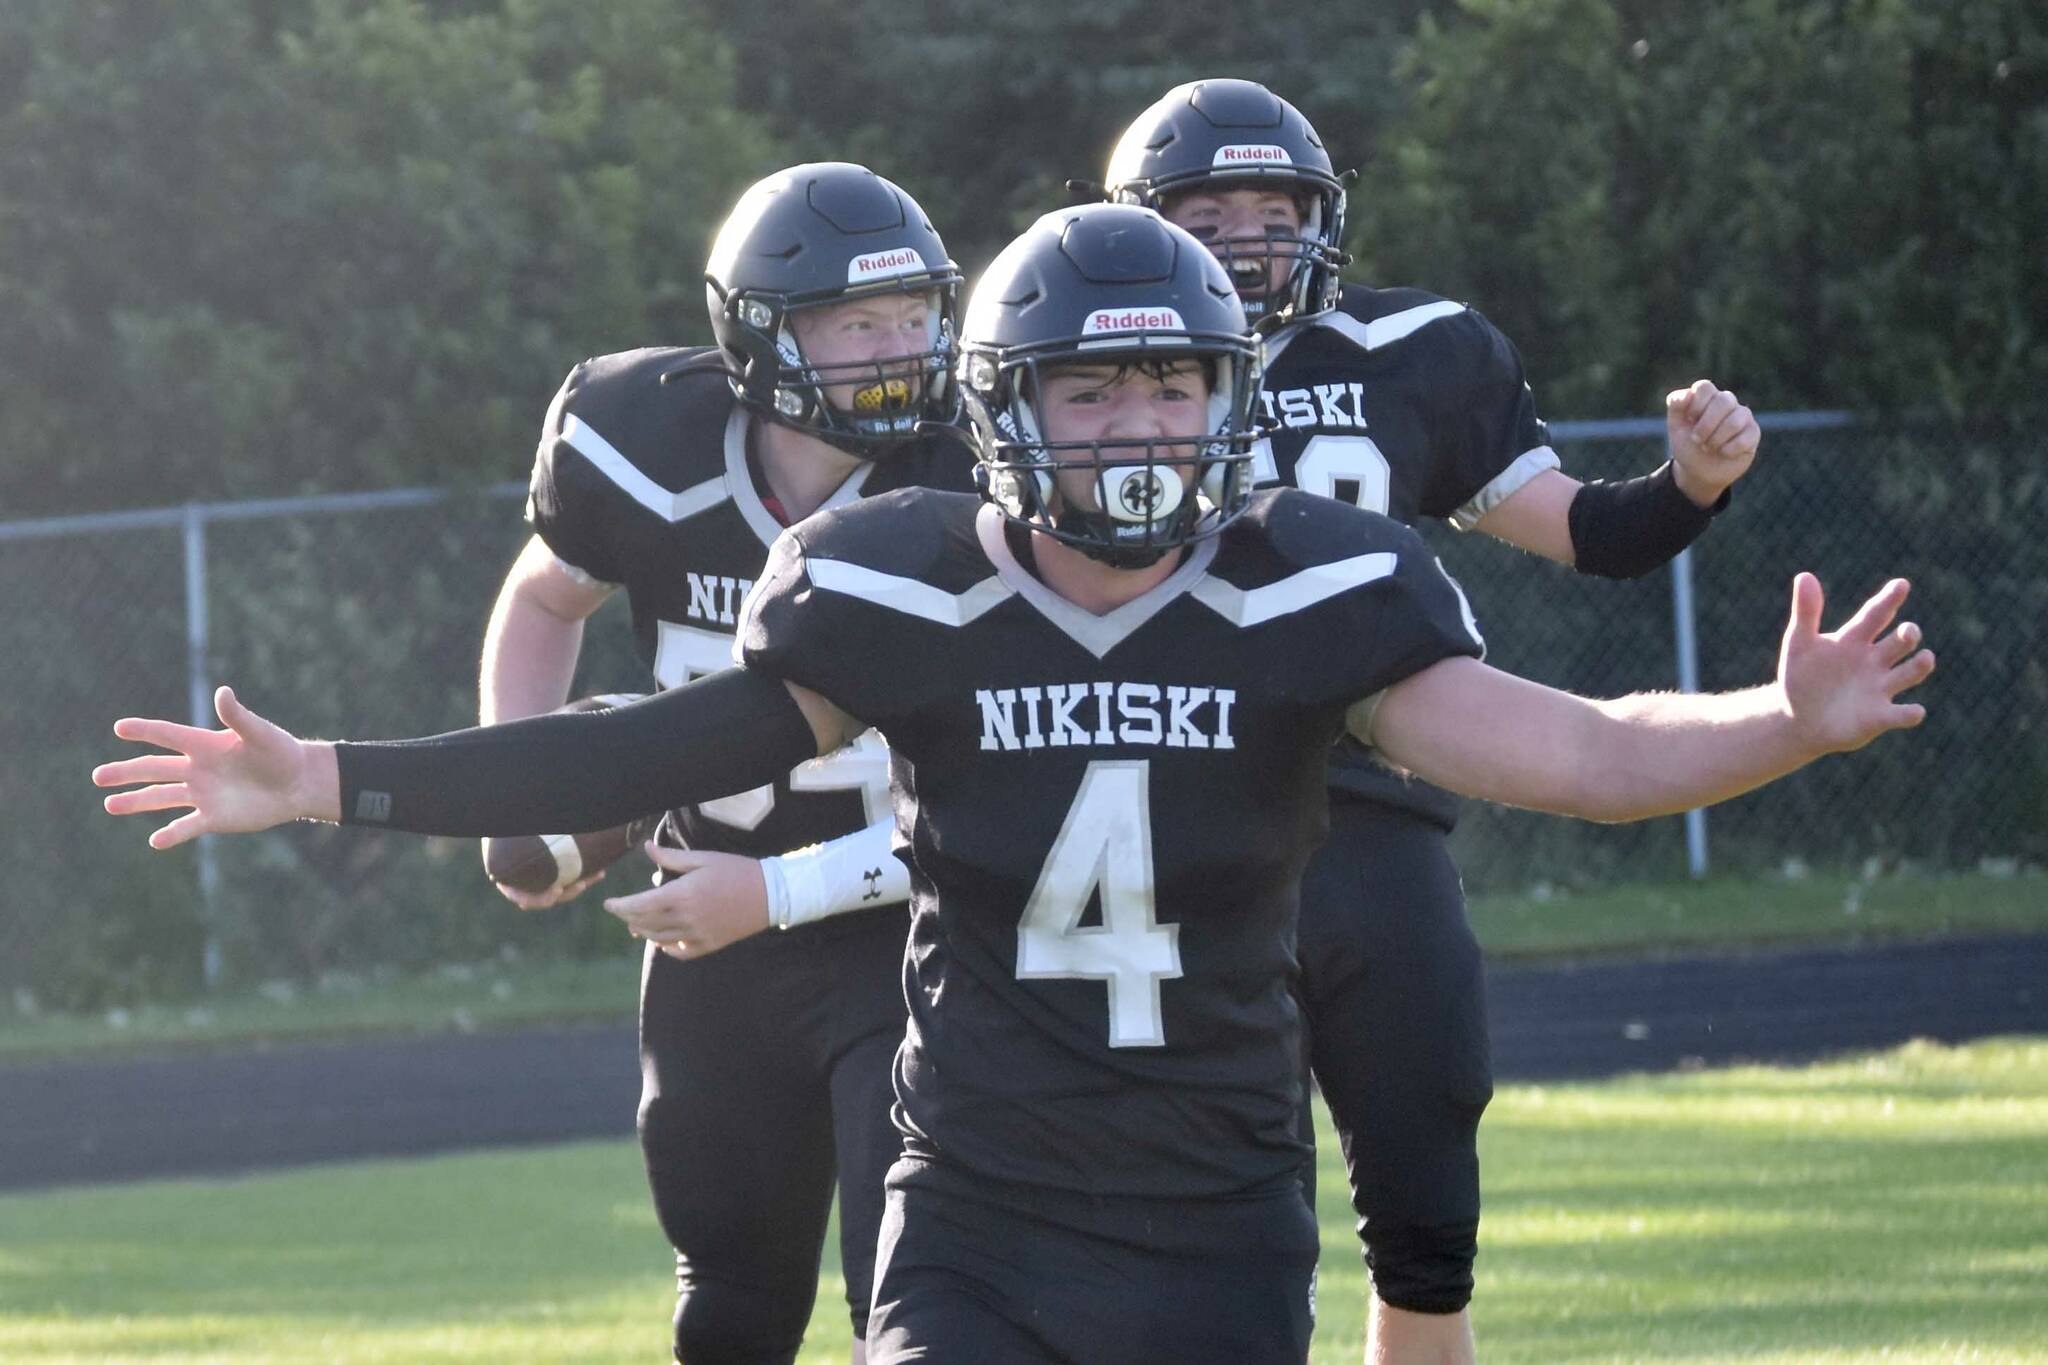 The Nikiski Bulldogs celebrate a touchdown catch by Lynn Deveer against Valdez on Friday, Sept. 1, 2023, at Nikiski Middle-High School in Nikiski, Alaska. Oliver Parrish is in front, while Deveer and Jerry Snodgrass are in the back. (Photo by Jeff Helminiak/Peninsula Clarion)